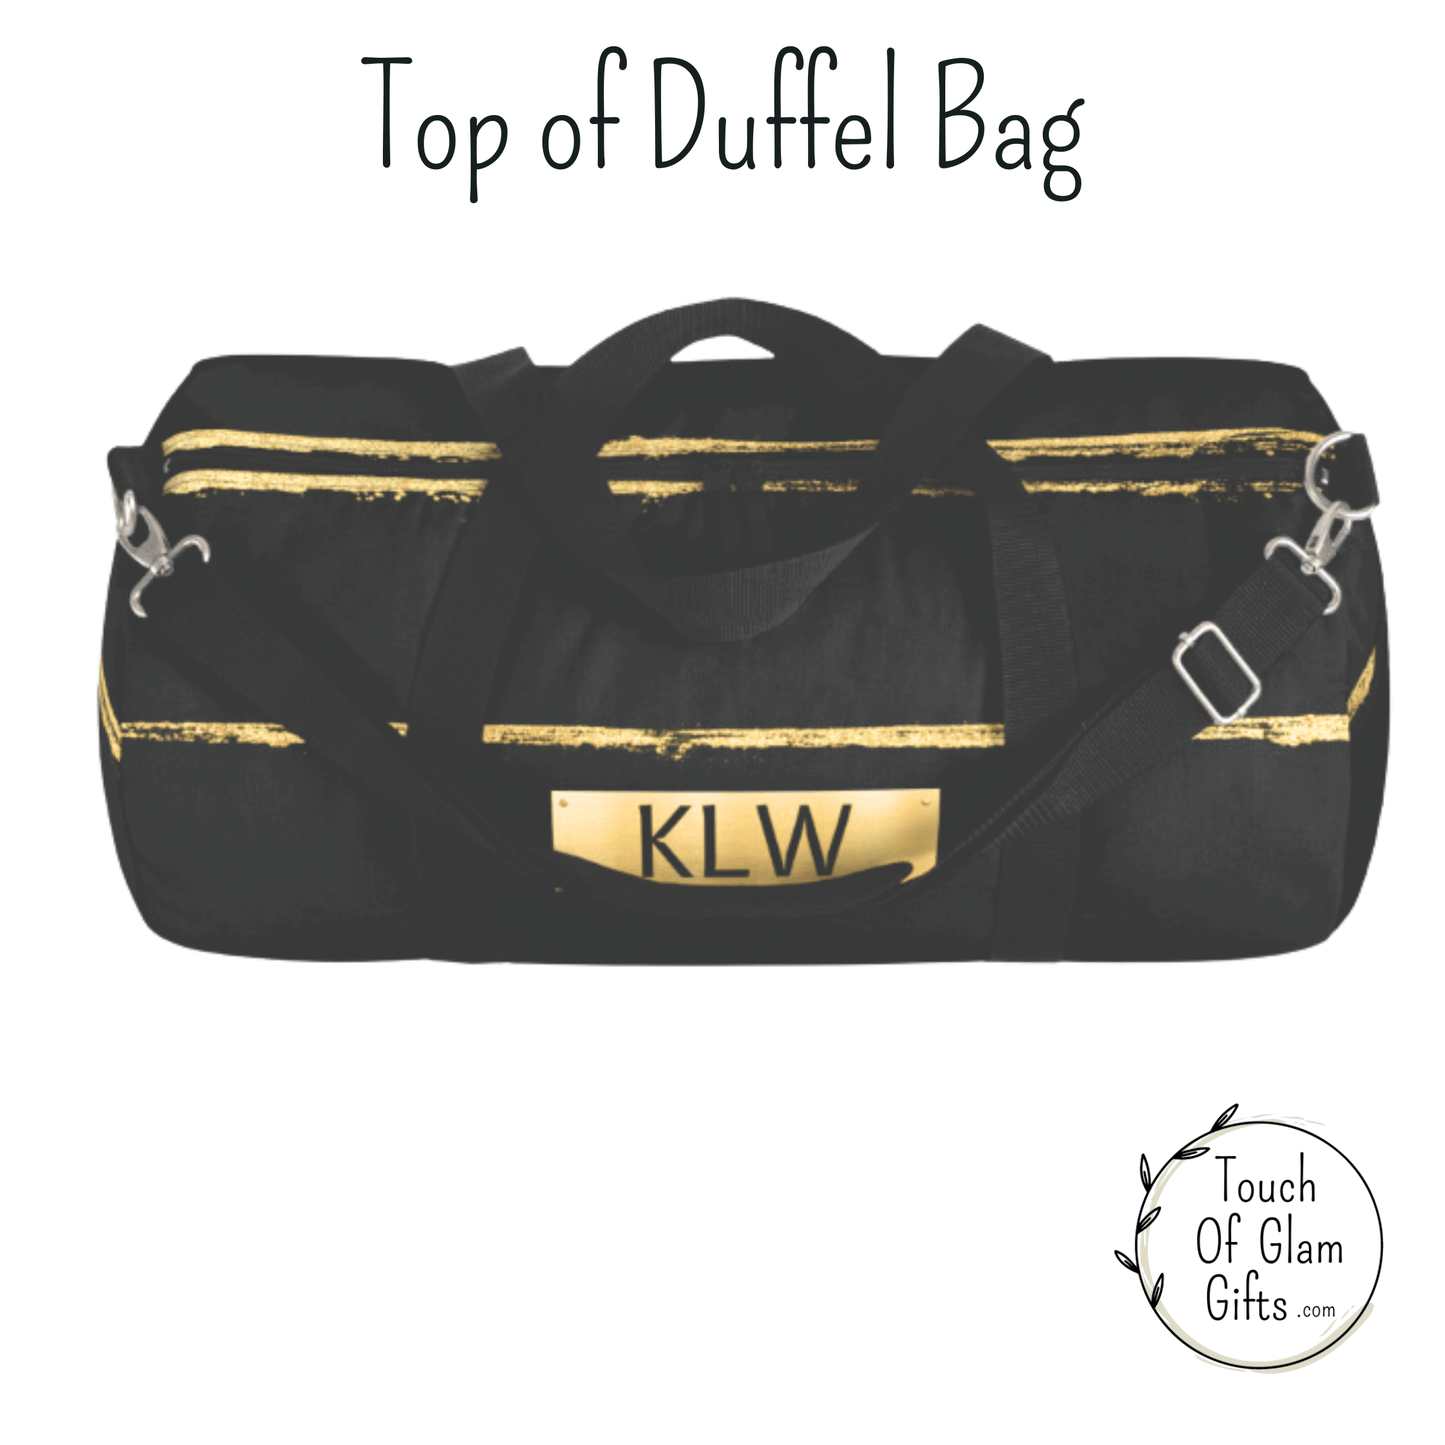 The top of our light black duffel bag shows a quality zipper with two zipper attachments for easy packing. The black handles and adjustable shoulder strap make this the perfect carry on bag for him.